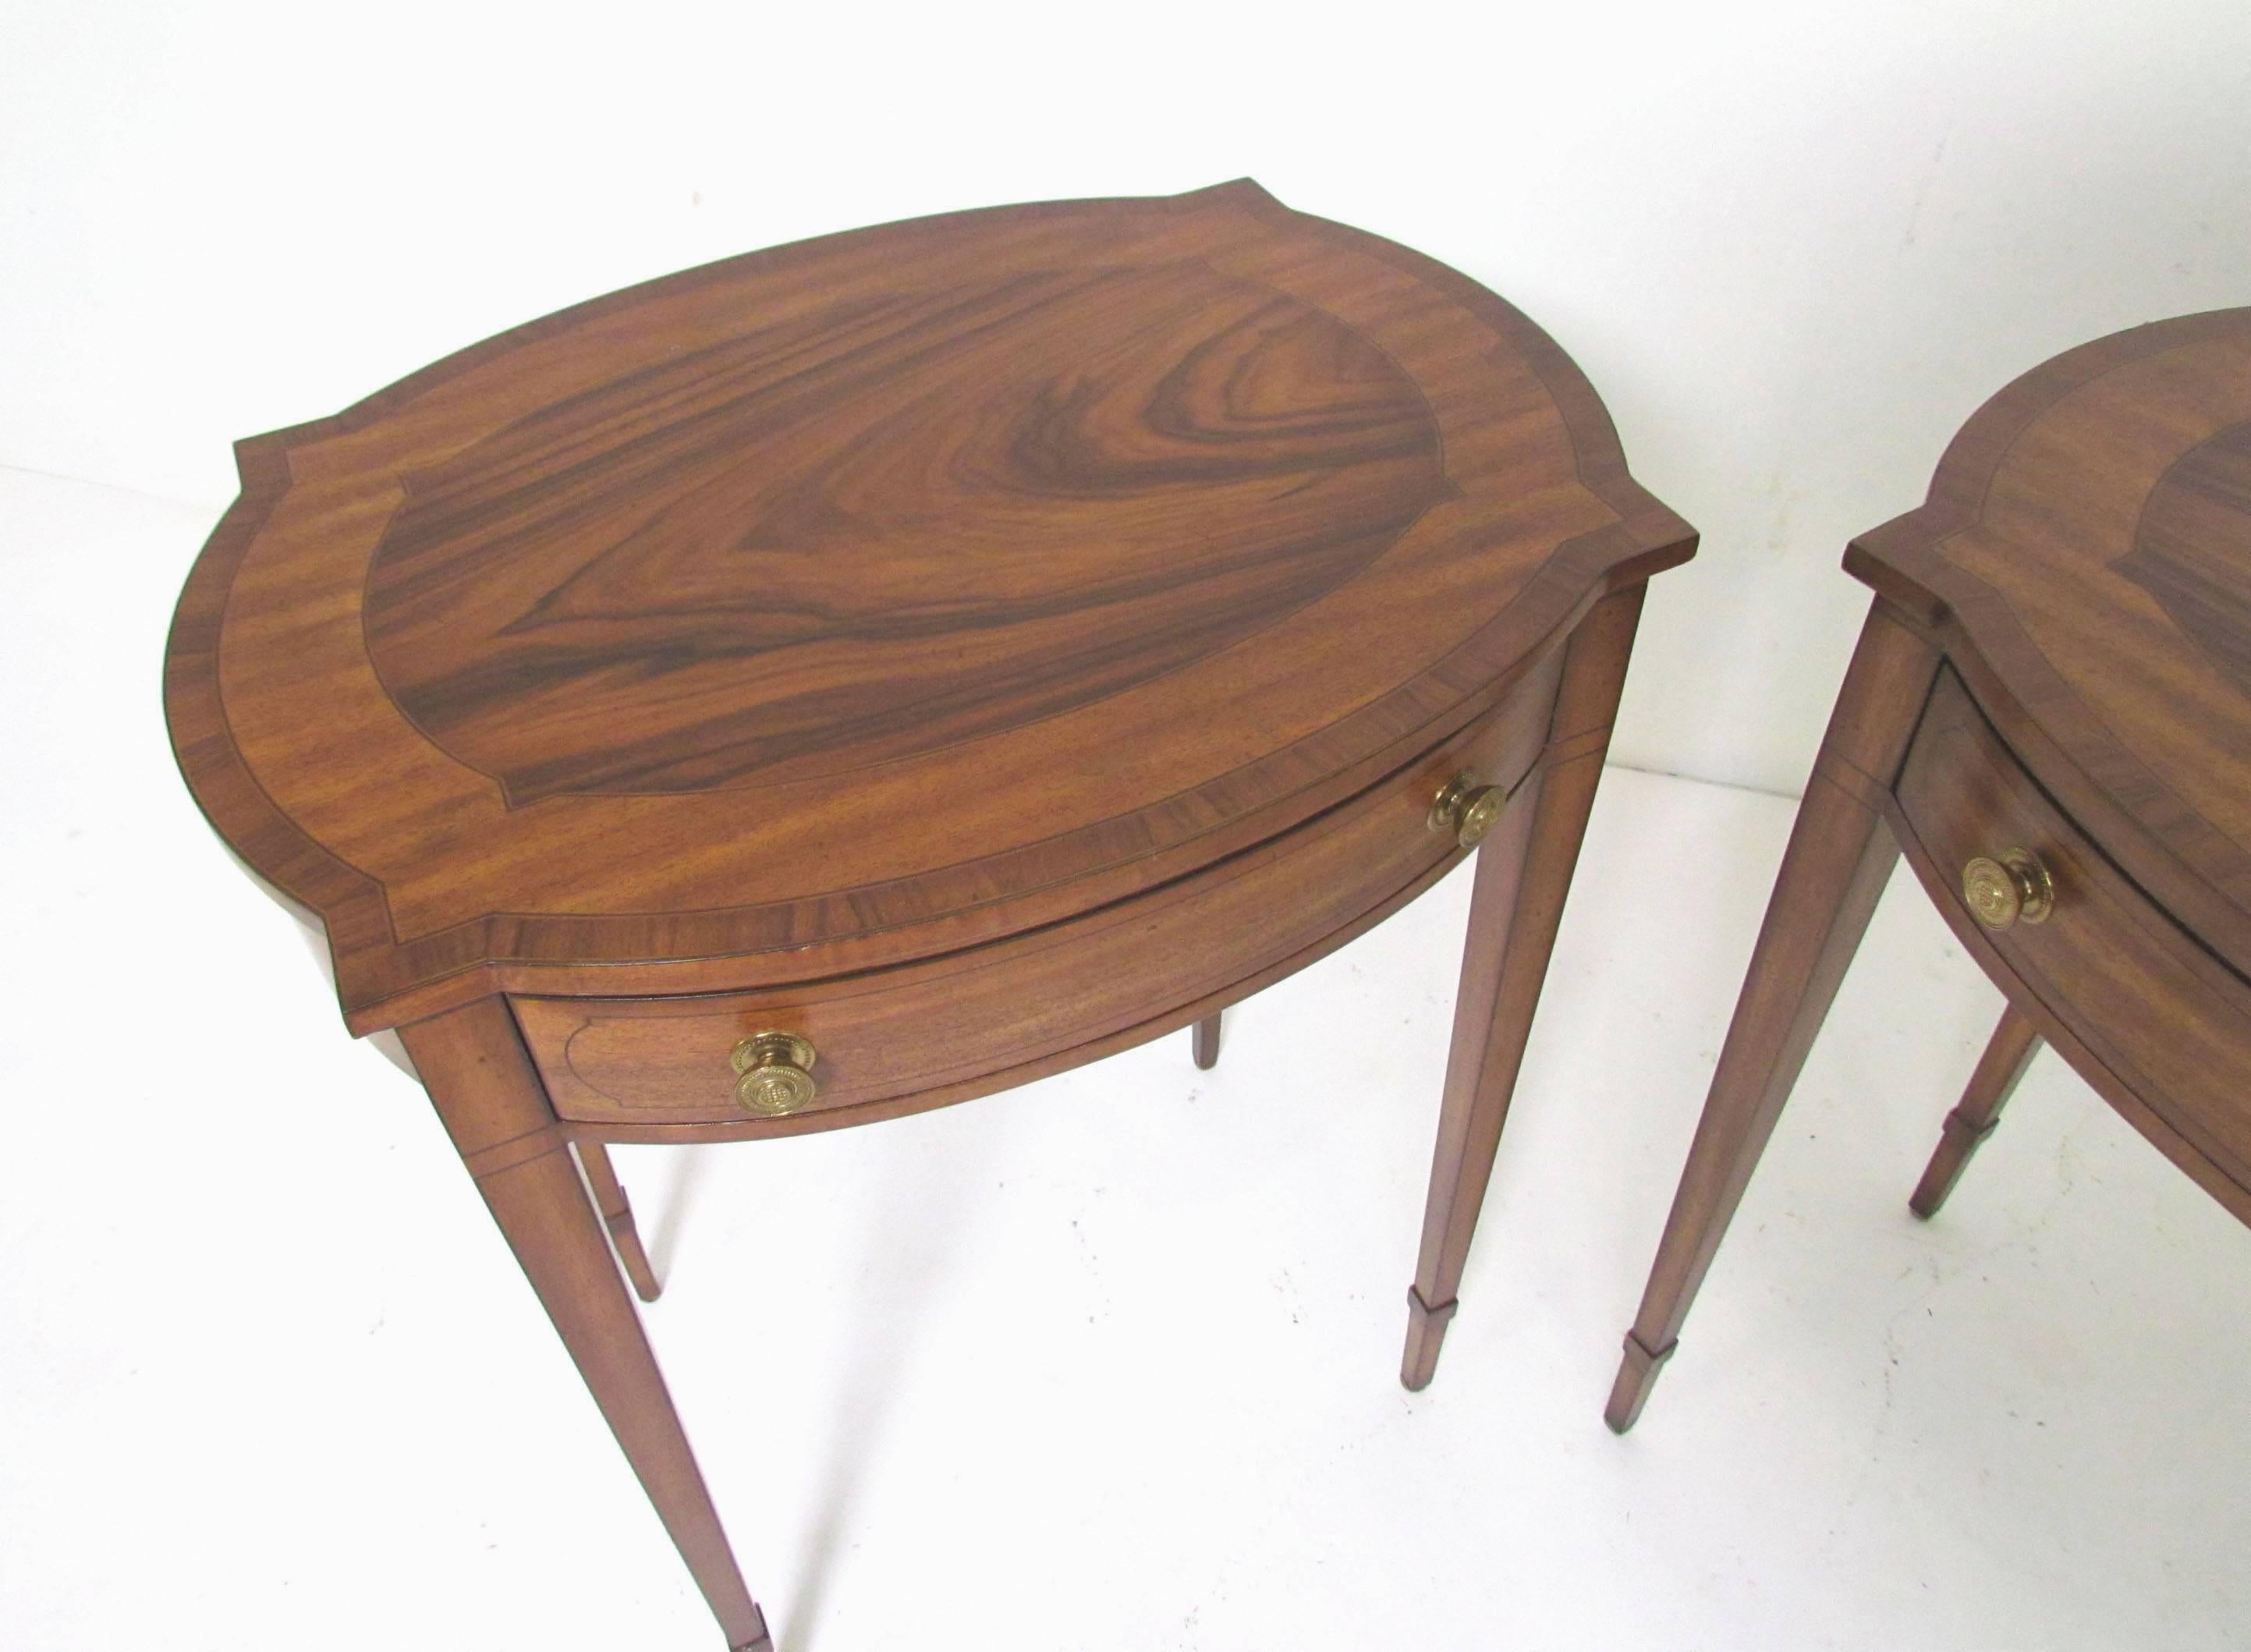 Pair of elegant English Regency style end tables by Maitland-Smith. Single drawer stands with mahogany inlay and gracefully tapered legs.